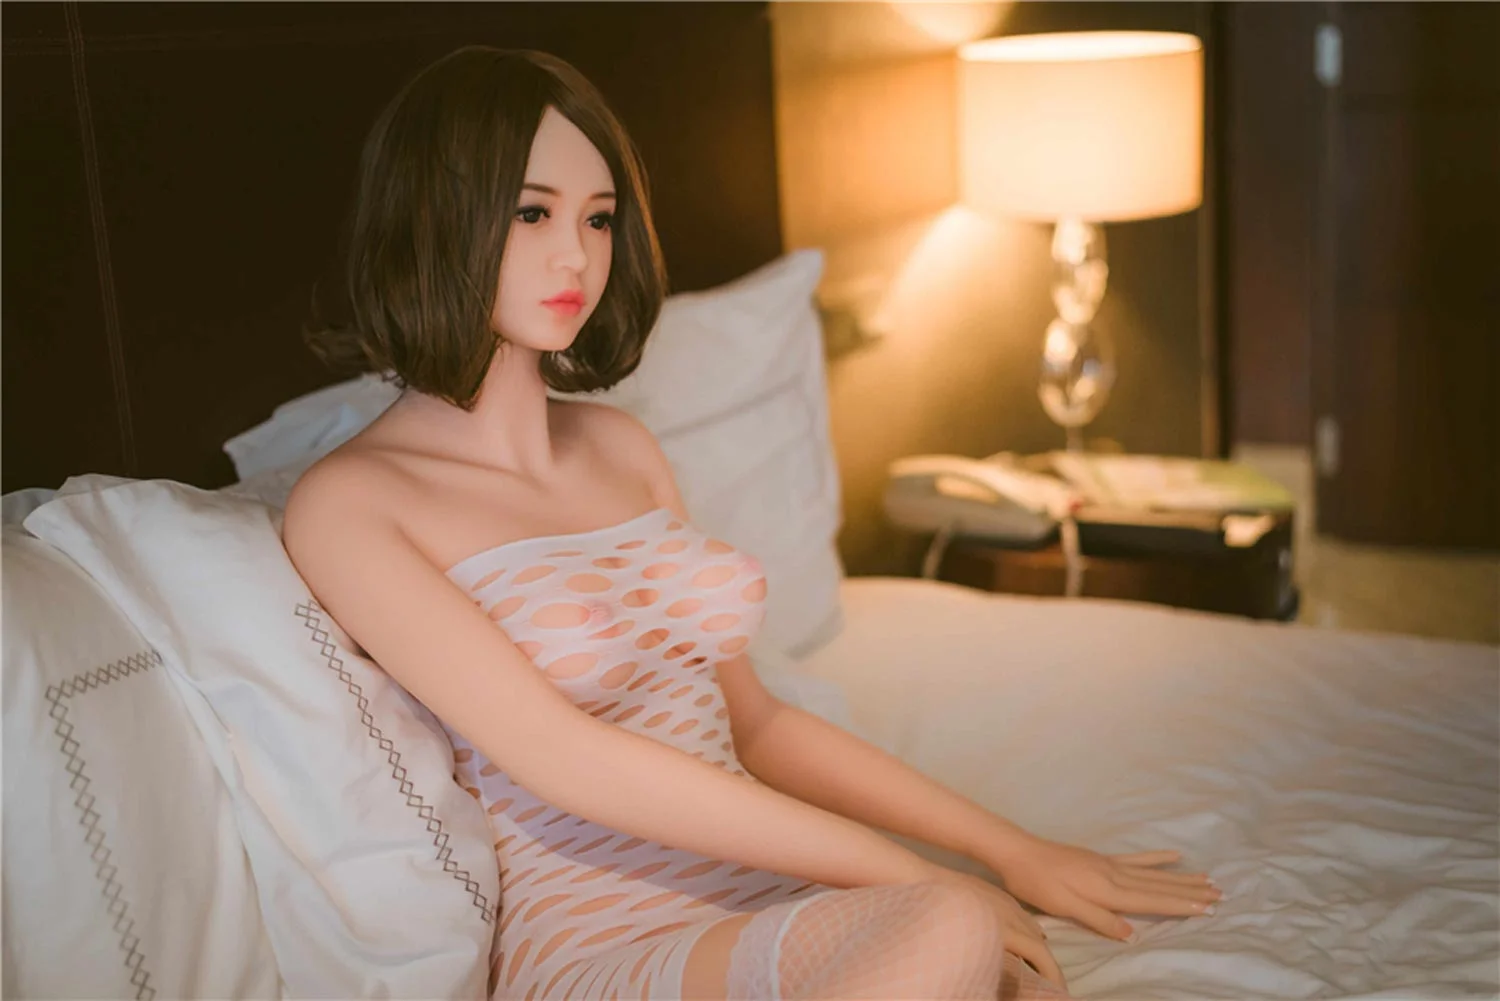 Sex doll with hands on bed